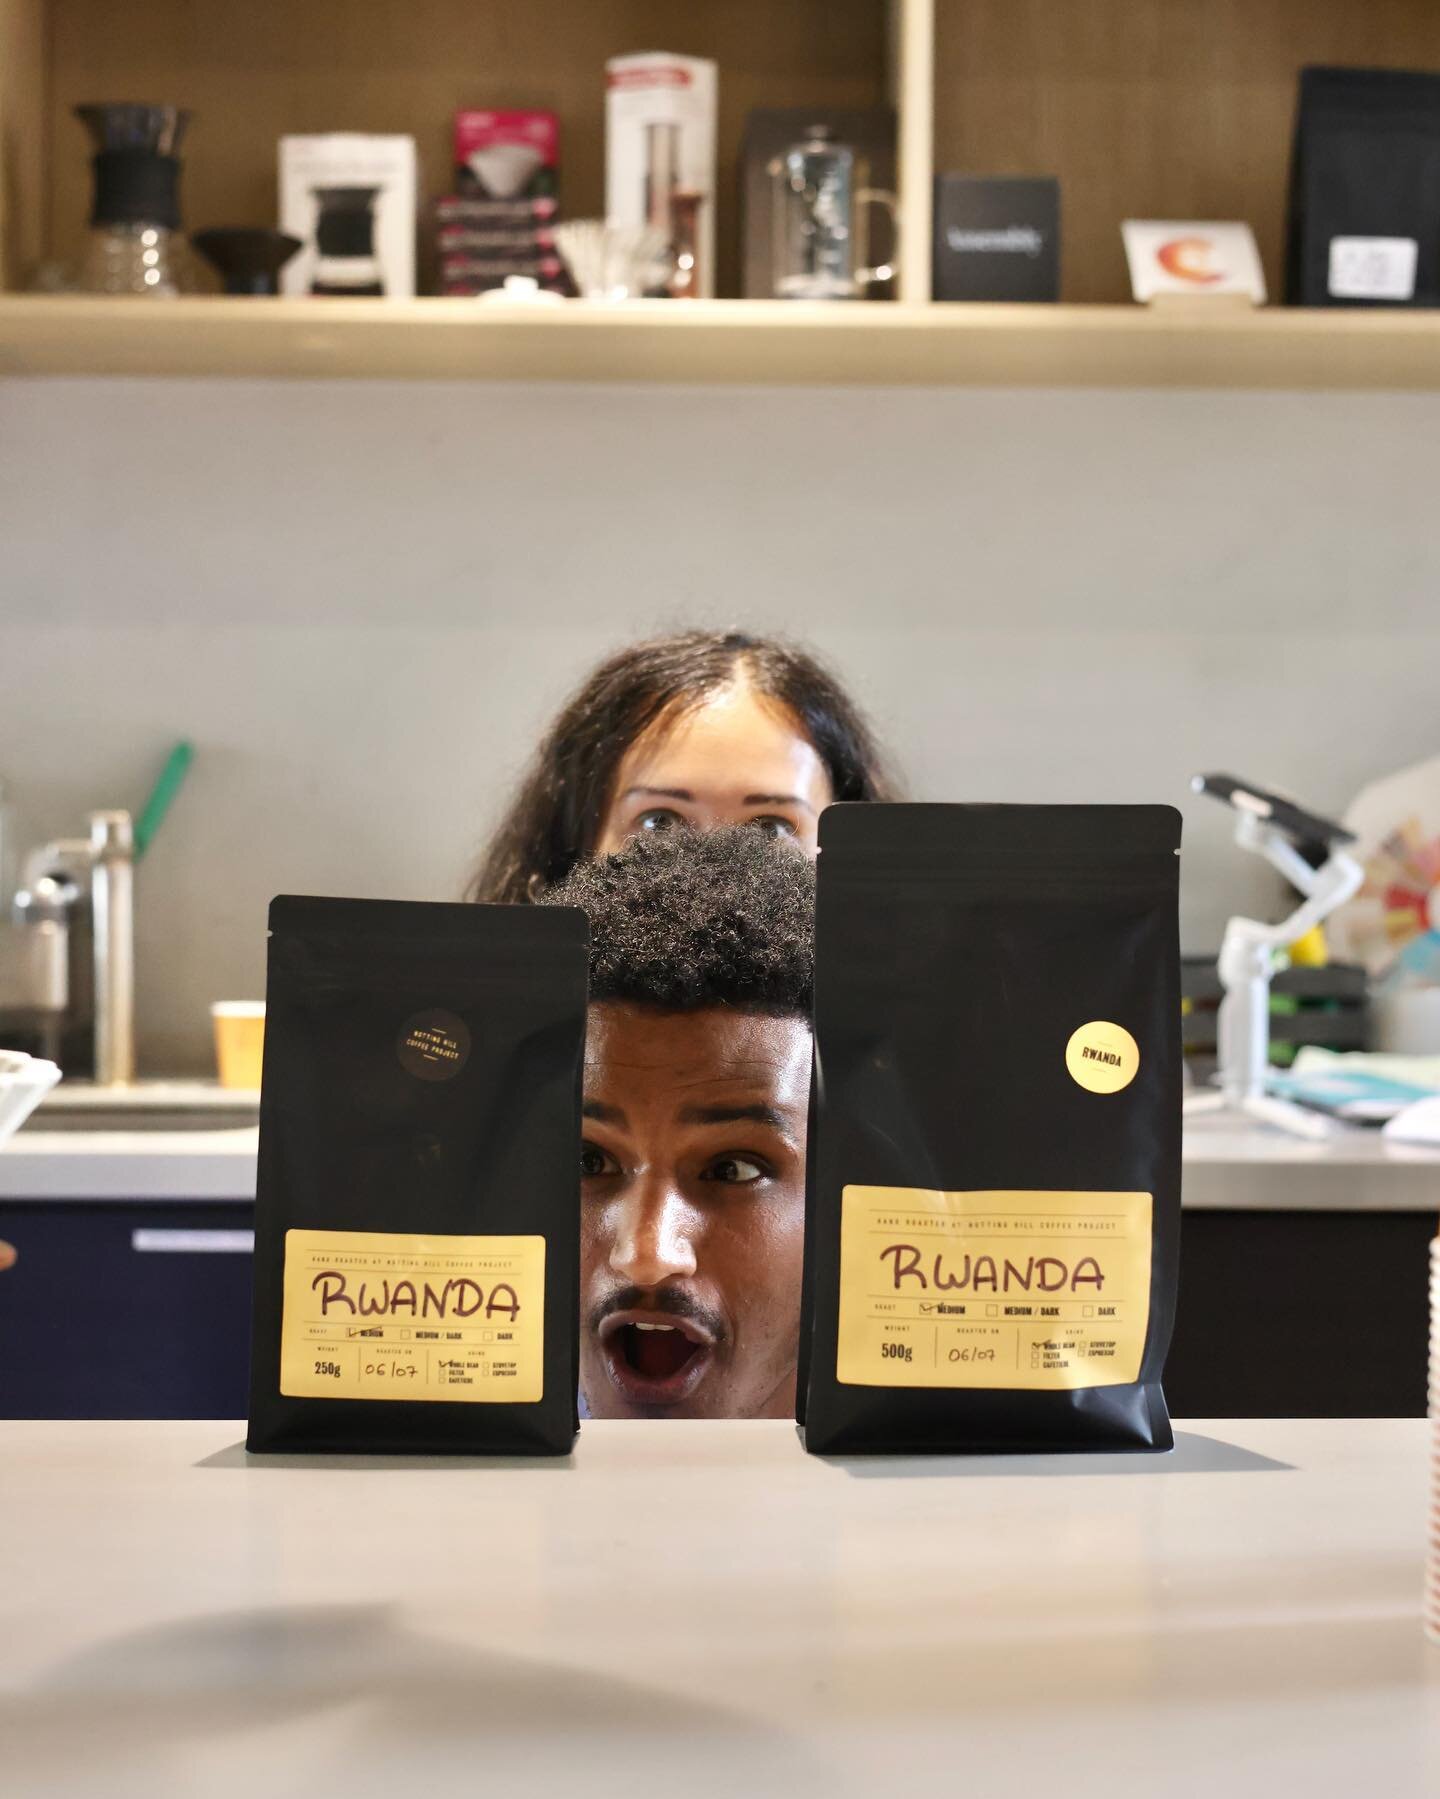 our faces ow that we have RWANDA large coffee bags for sale again! #NottingHillCoffeeProject